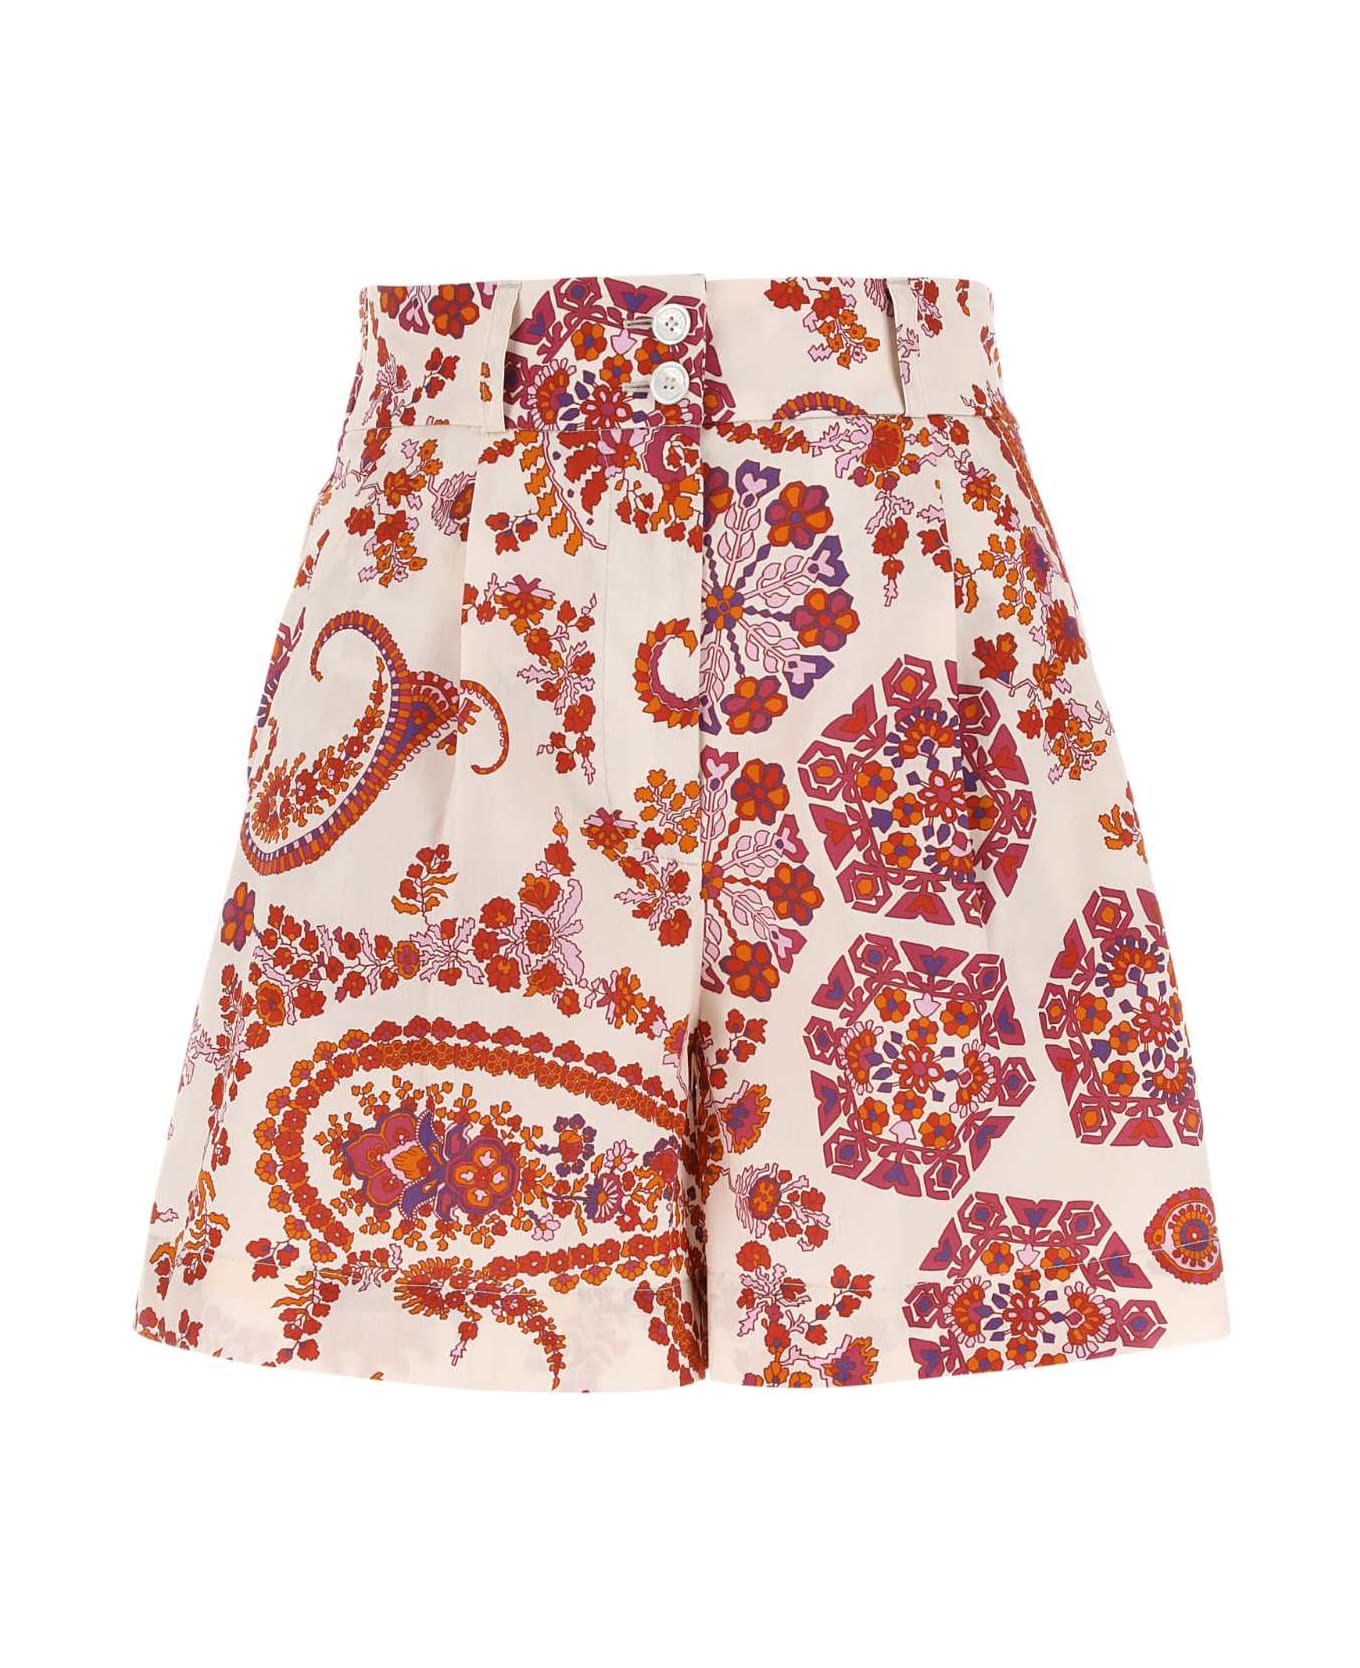 Woolrich Printed Cotton Shorts - 5490 ショートパンツ